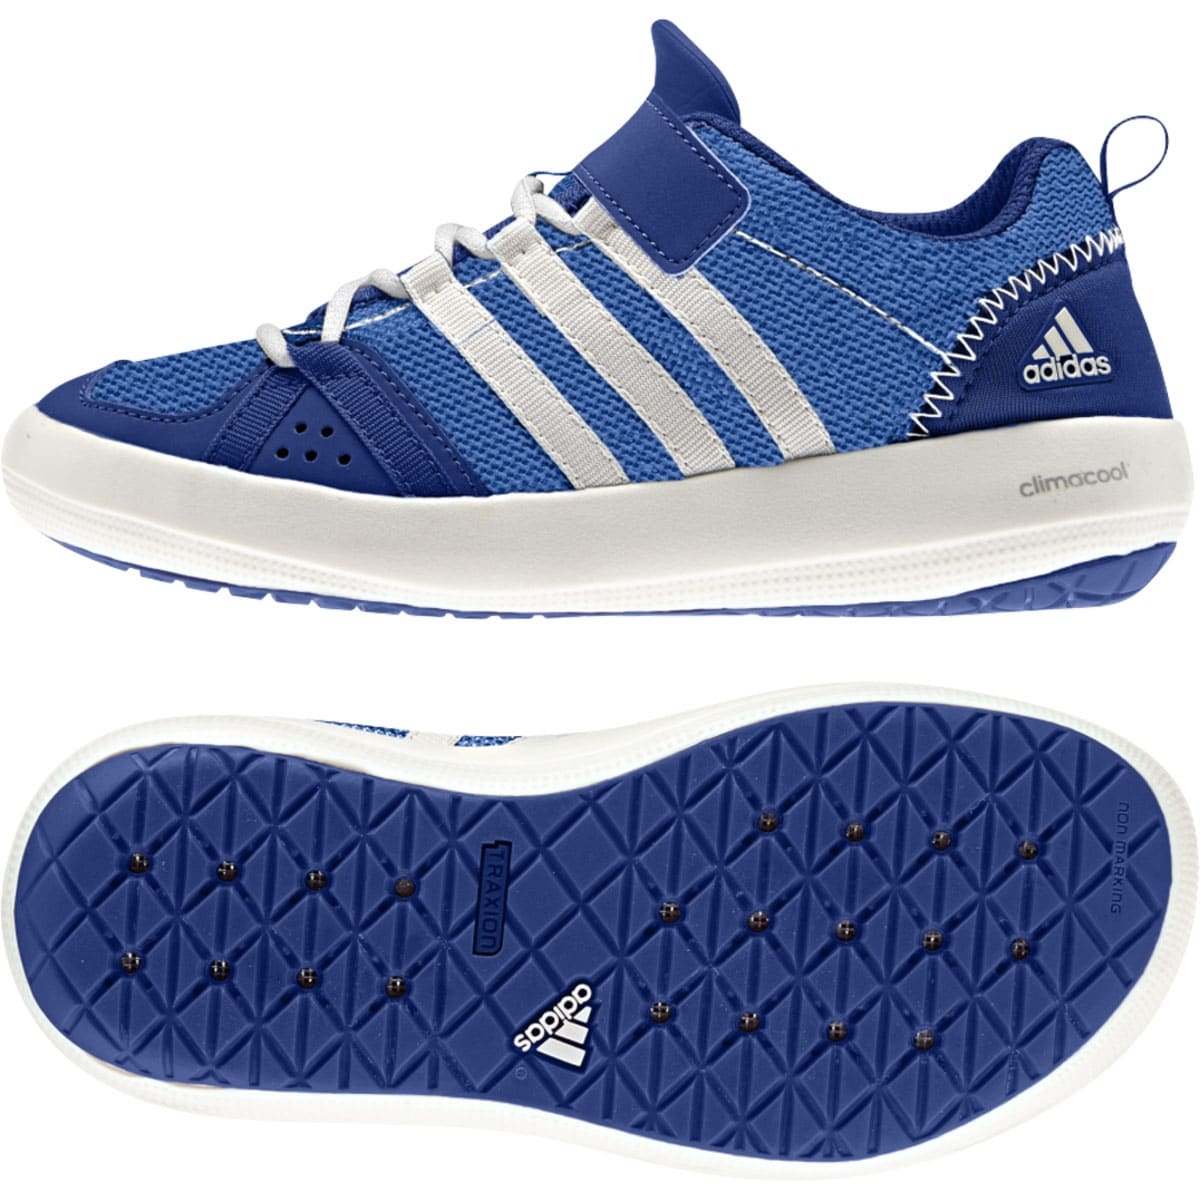 adidas outdoor kid's climacool boat cf lace up sneakers